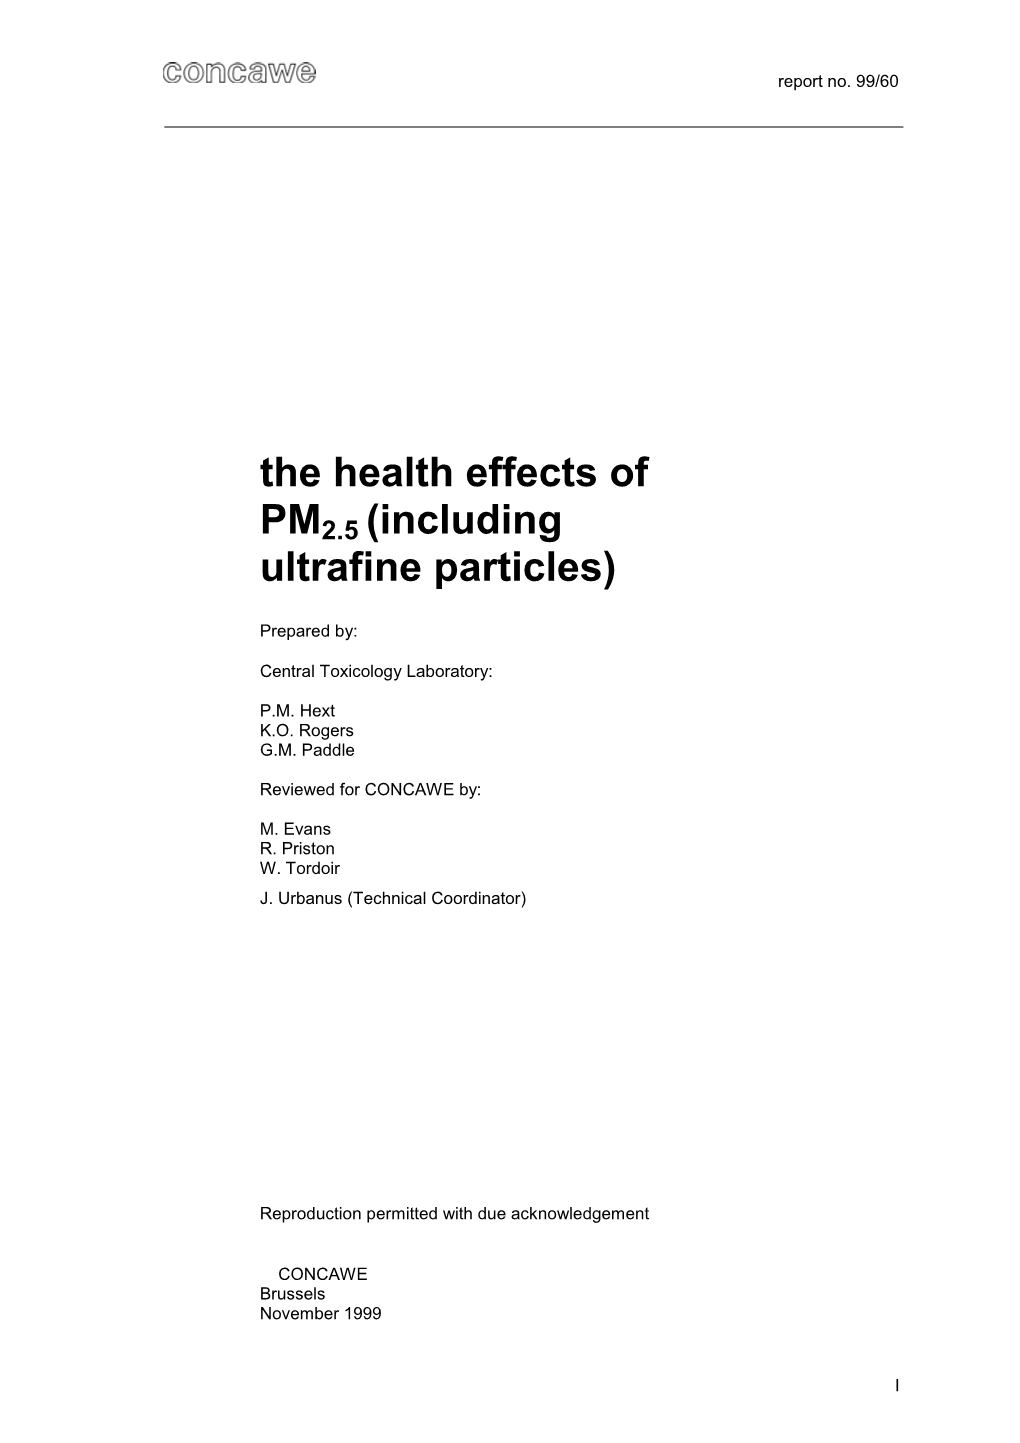 The Health Effects of PM2.5 (Including Ultrafine Particles)